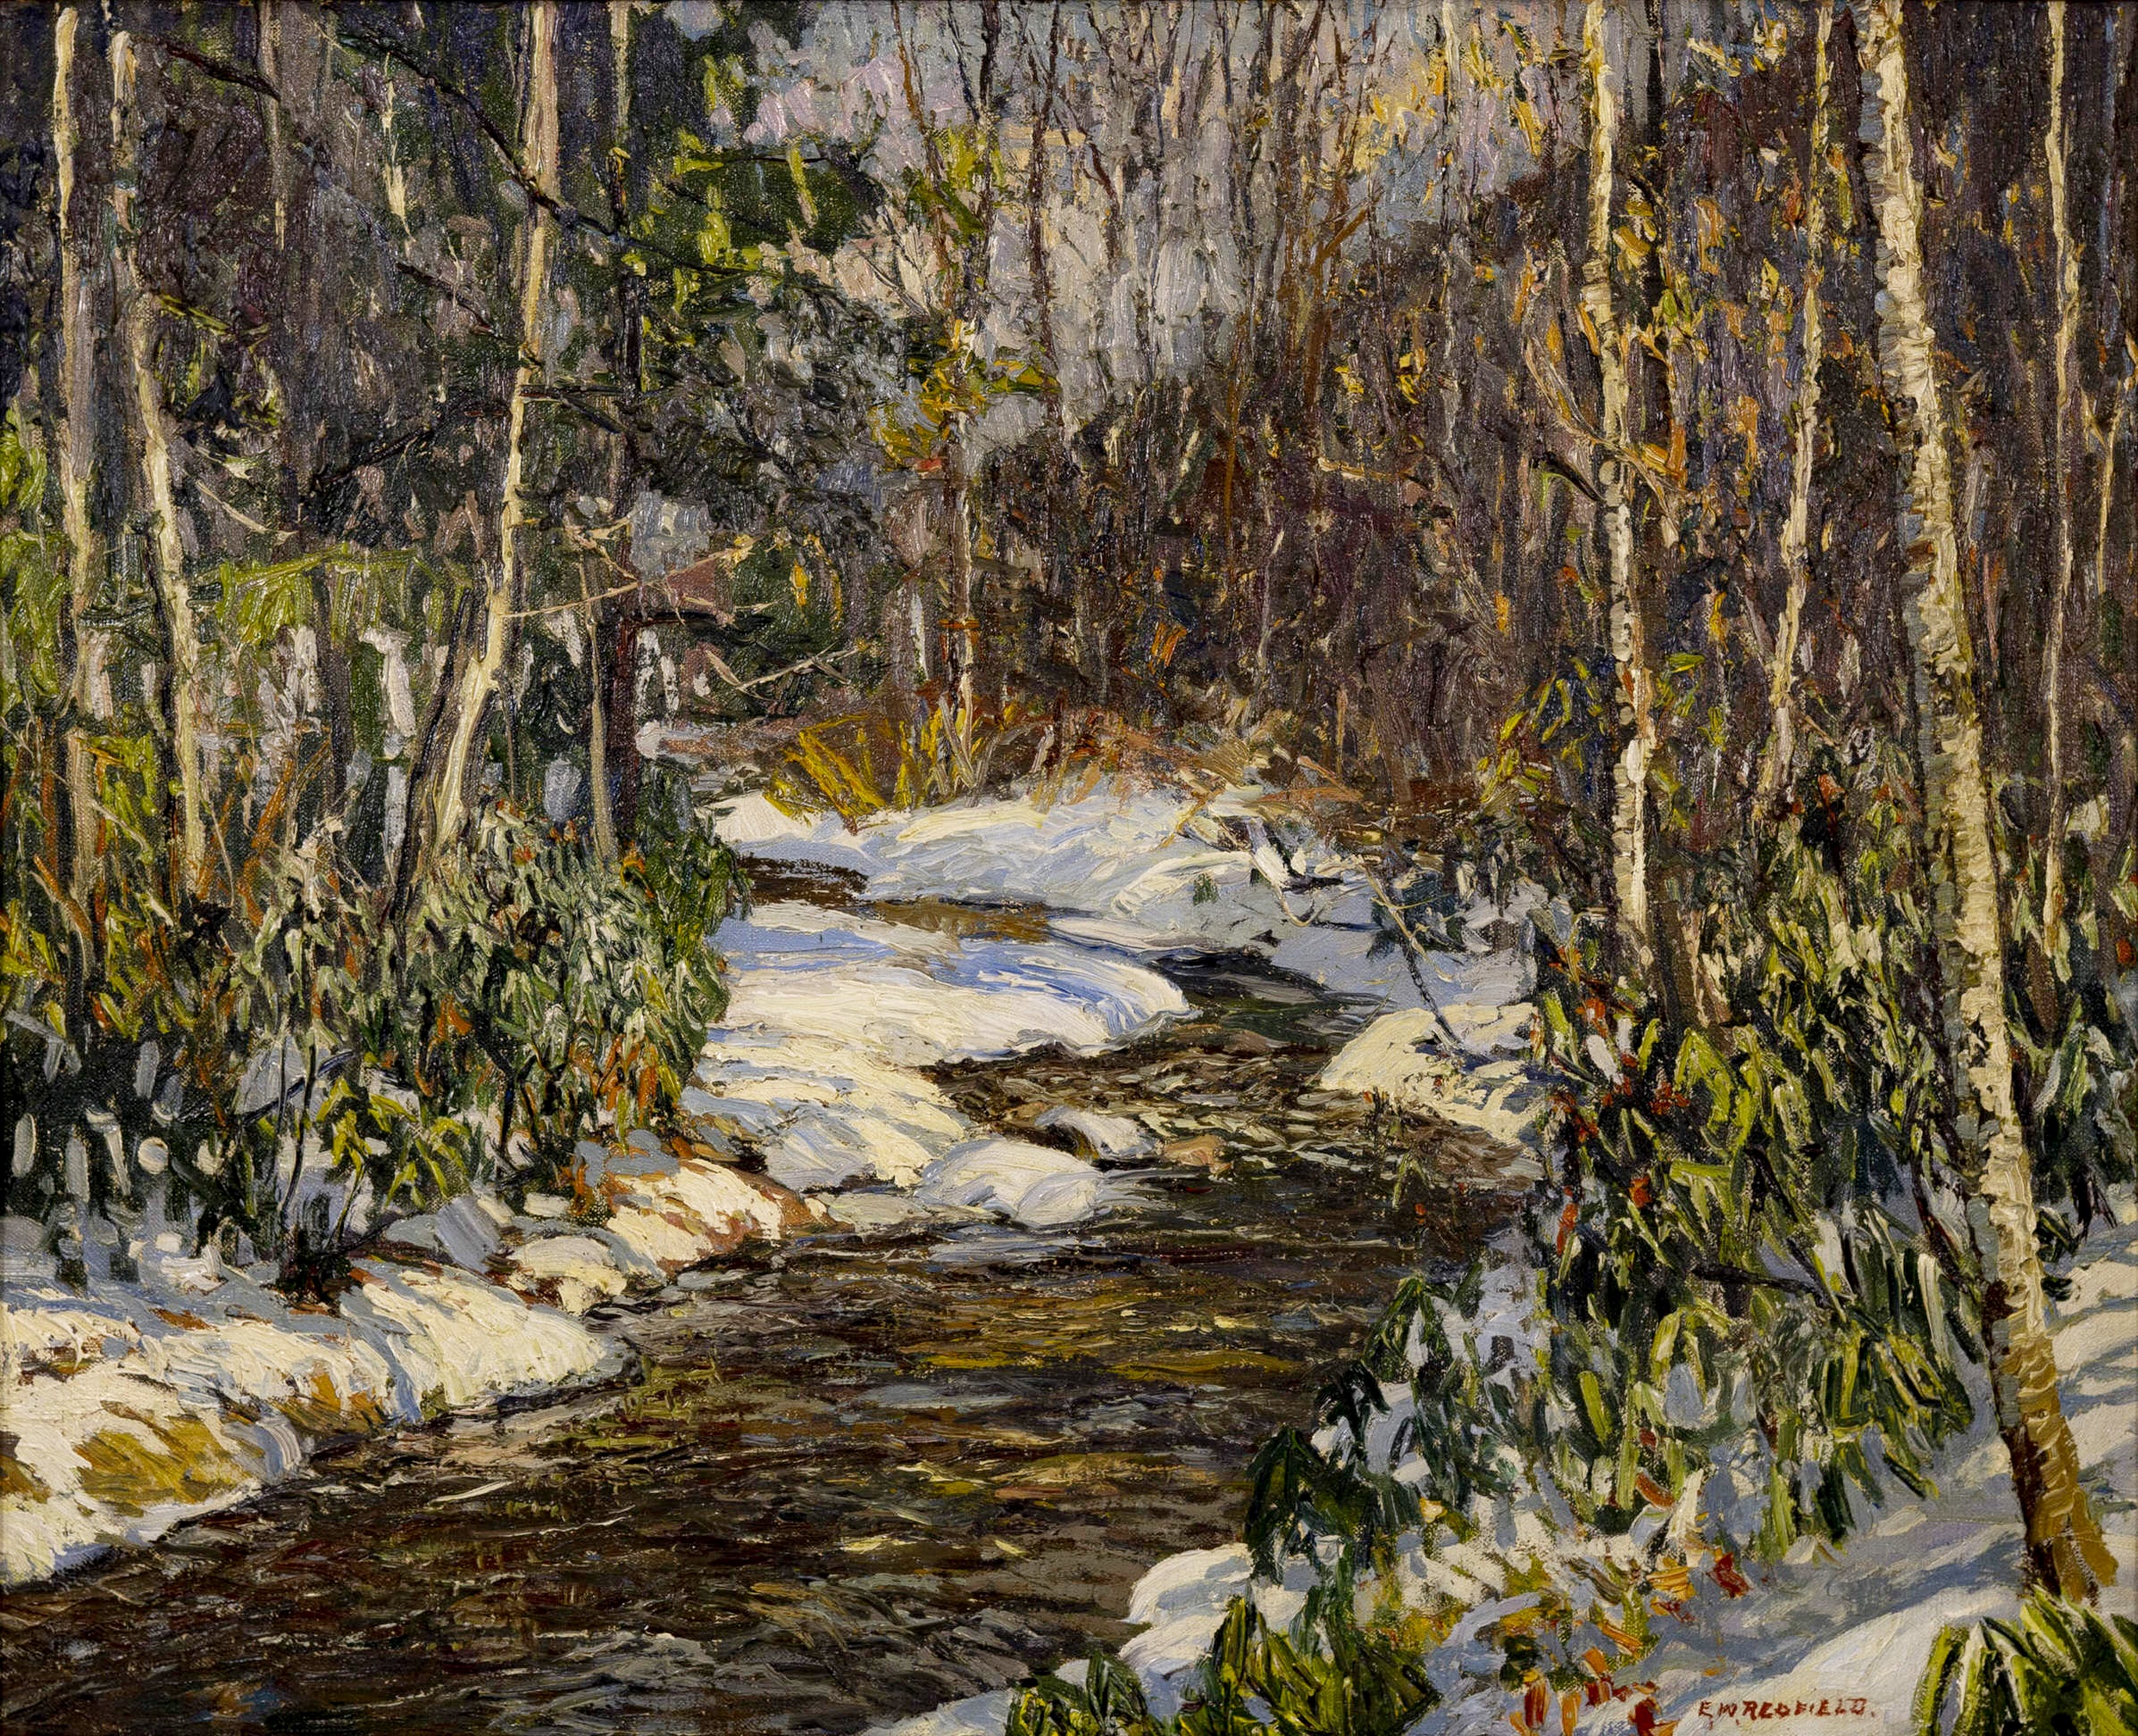 Edward Willis Redfield (American, 1869-1965) Woodland Brook, Ca. 1915. Sold For $168,750 At Partner Capsule Gallery Auction